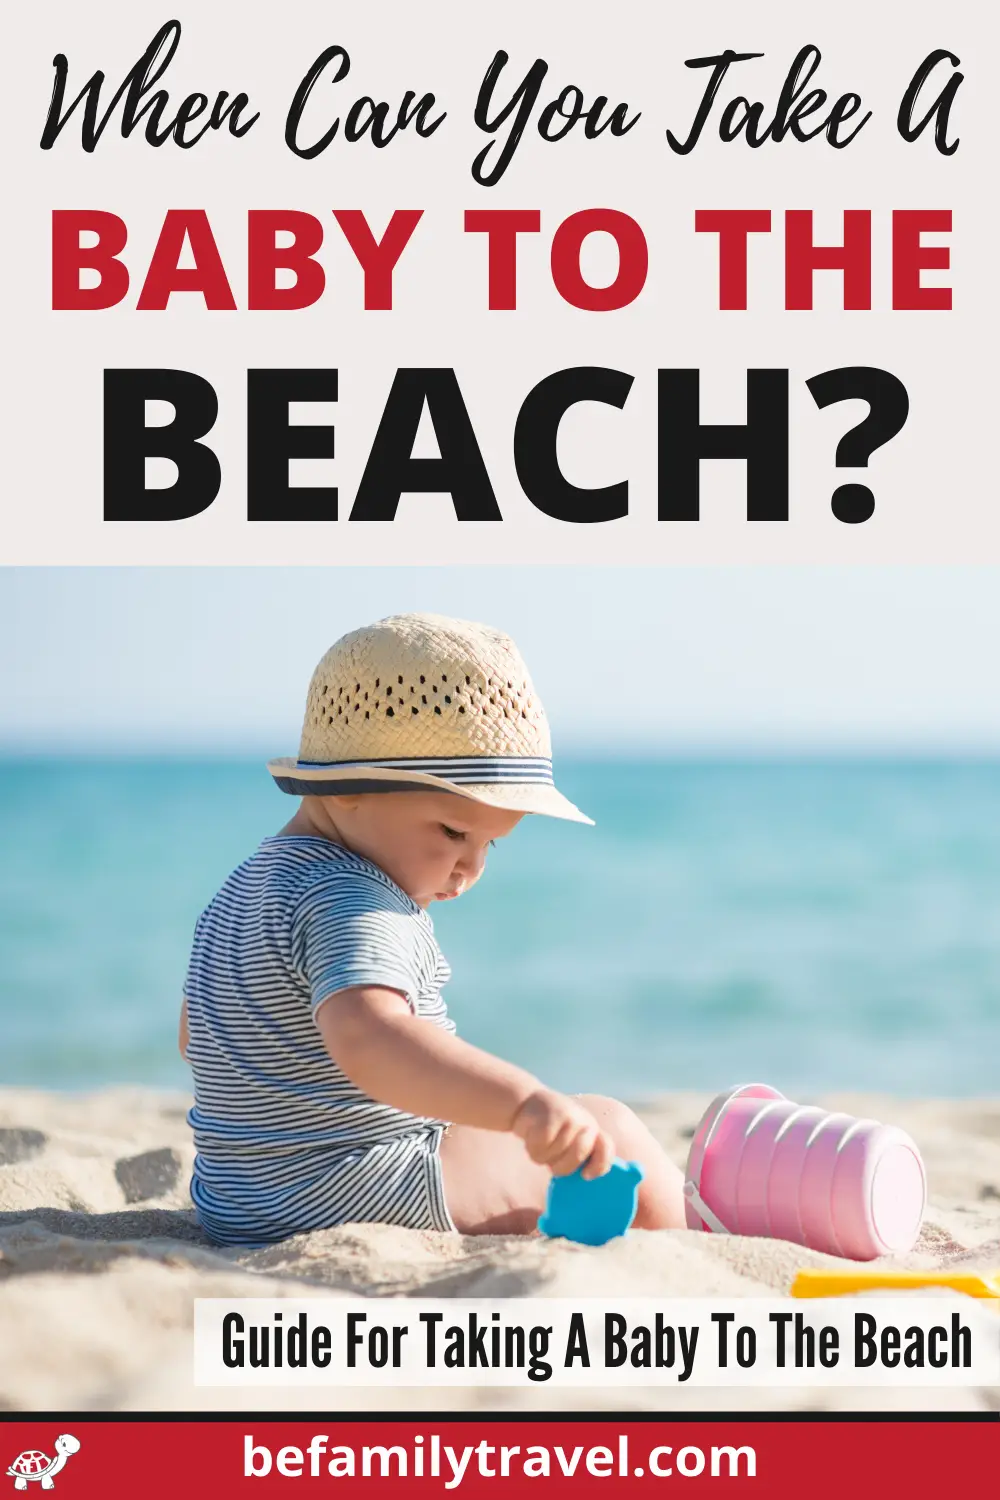 When Can You Take a Baby to the Beach? - BeFamilyTravel